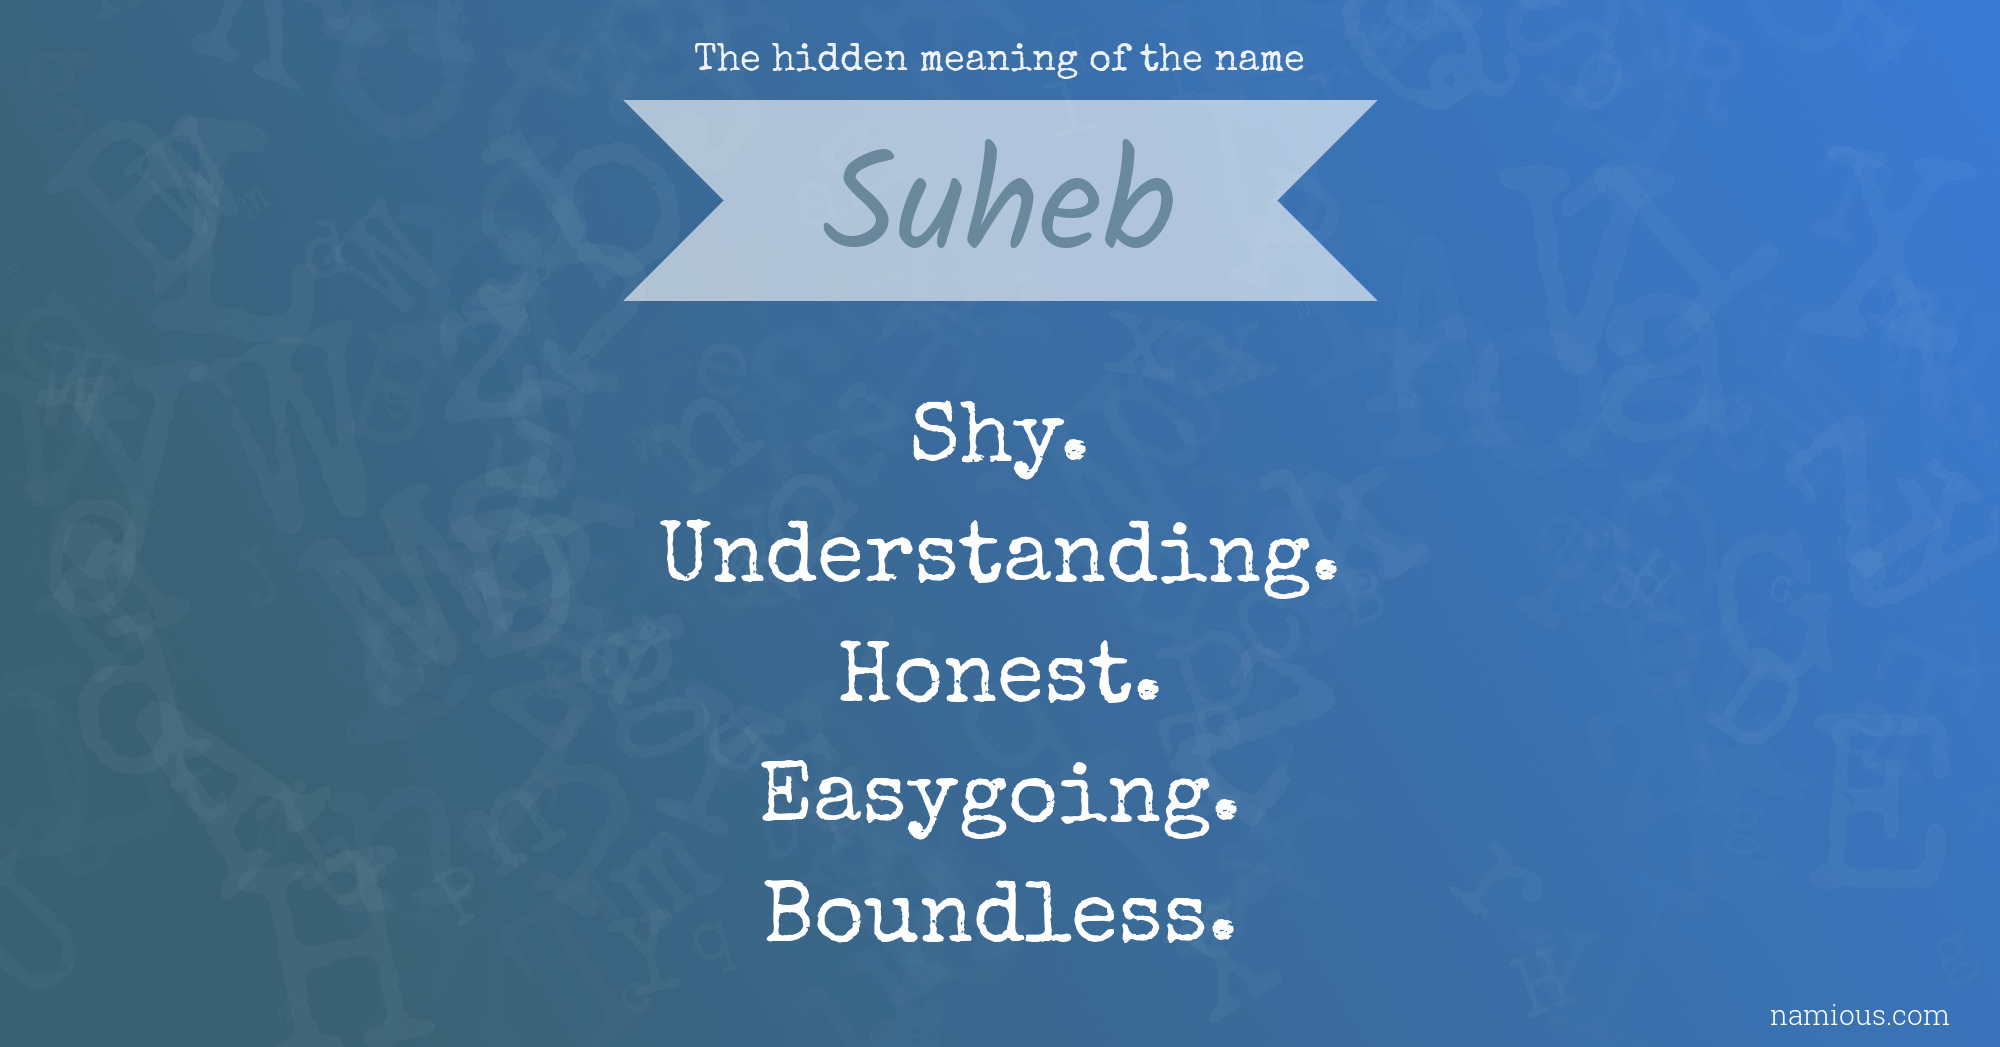 The hidden meaning of the name Suheb